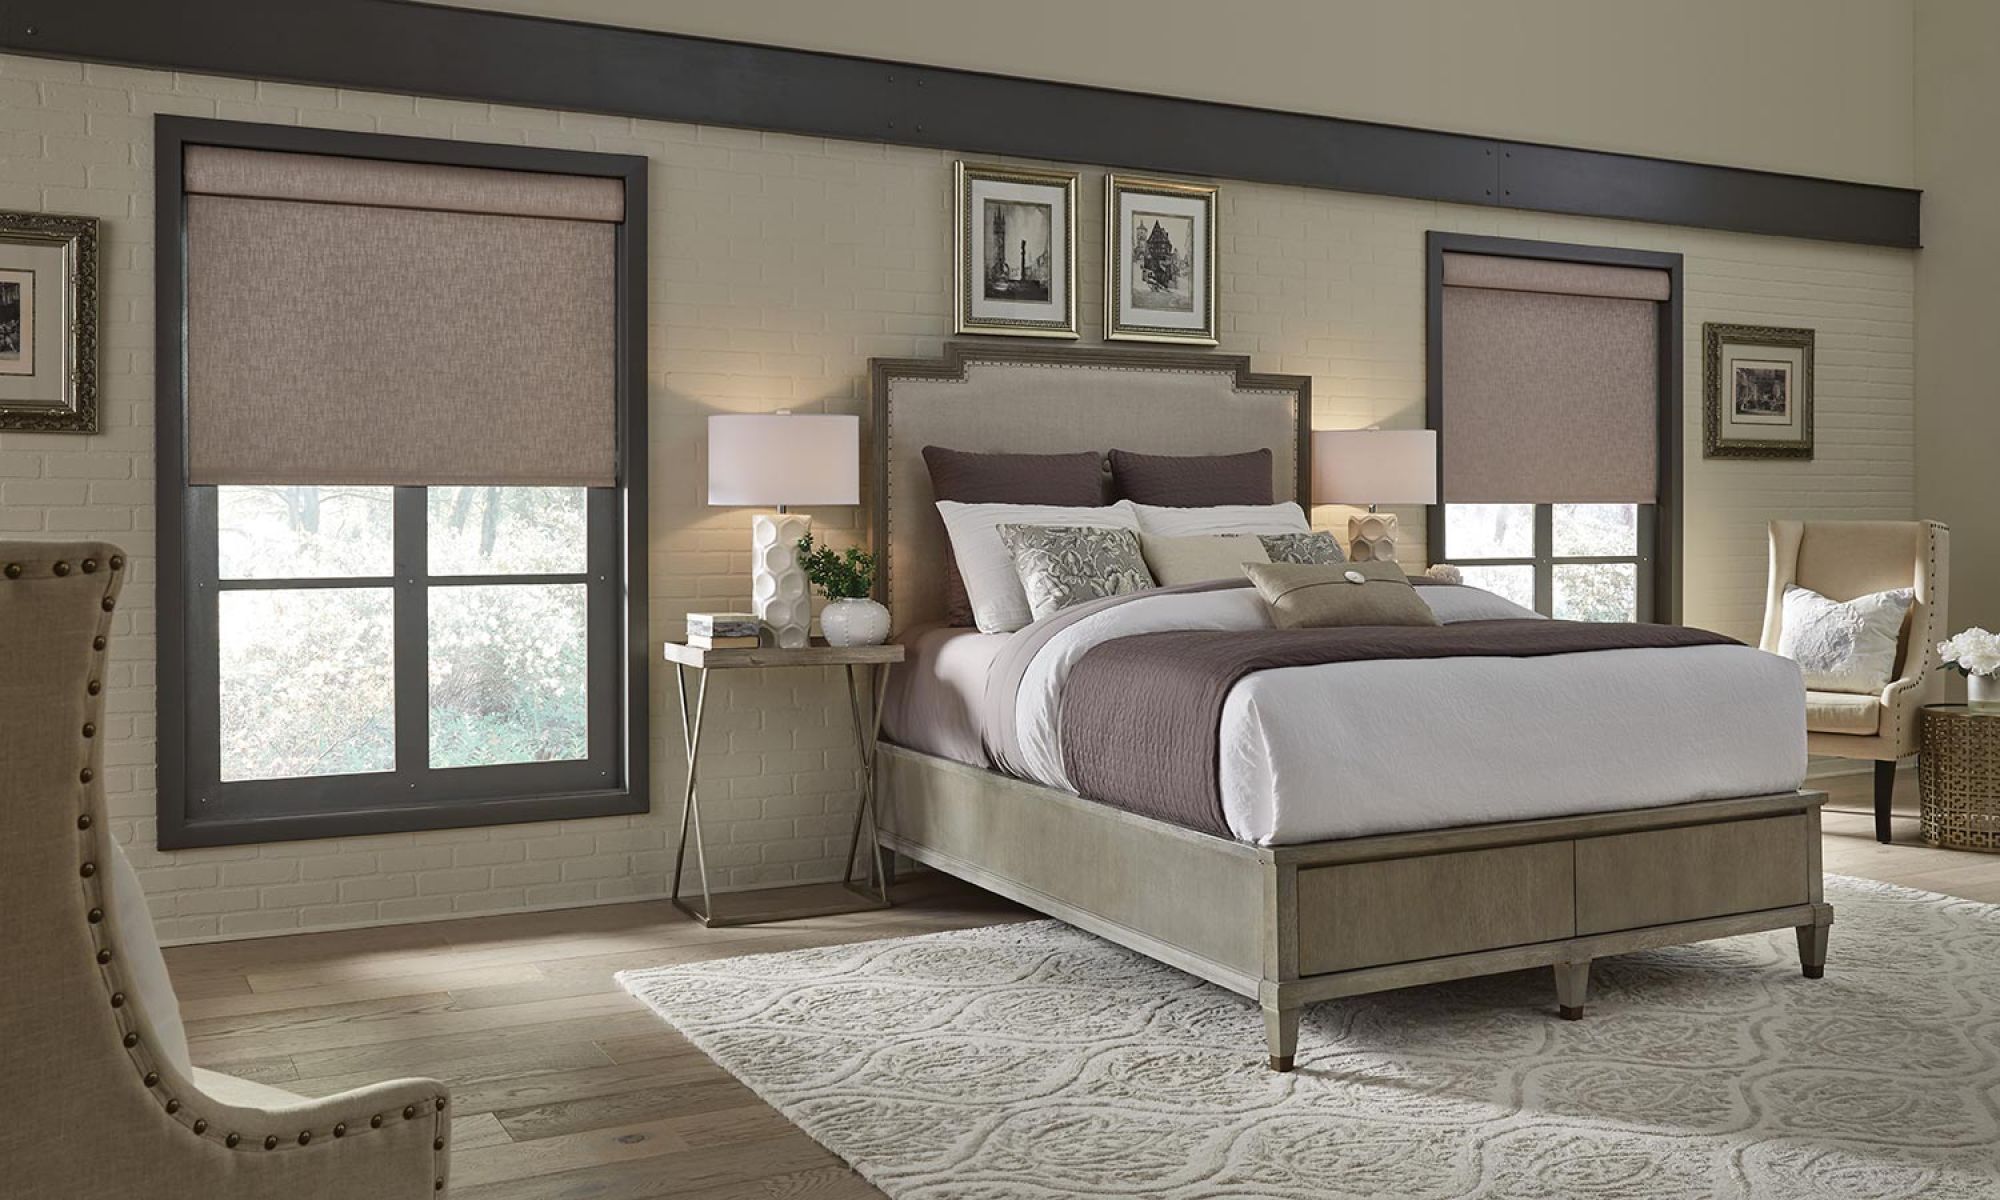 Lutron shades in a neutral colored bedroom